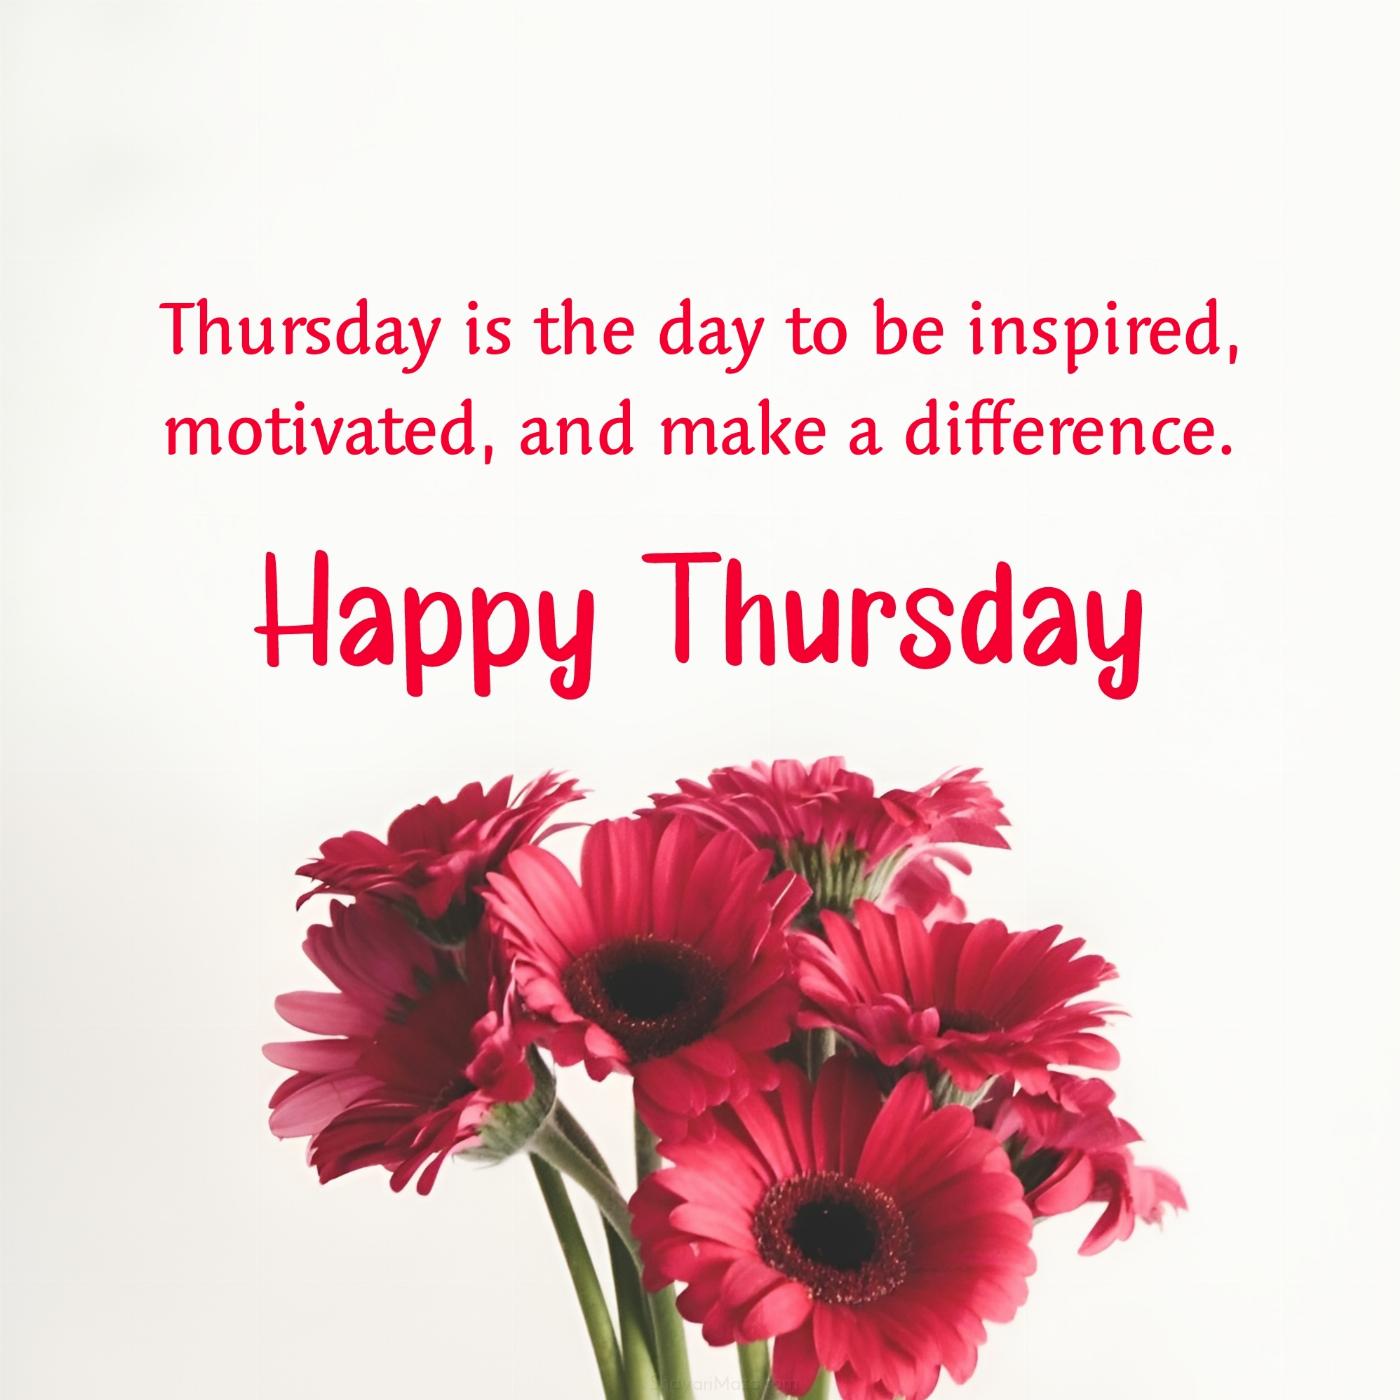 Thursday is the day to be inspired motivated